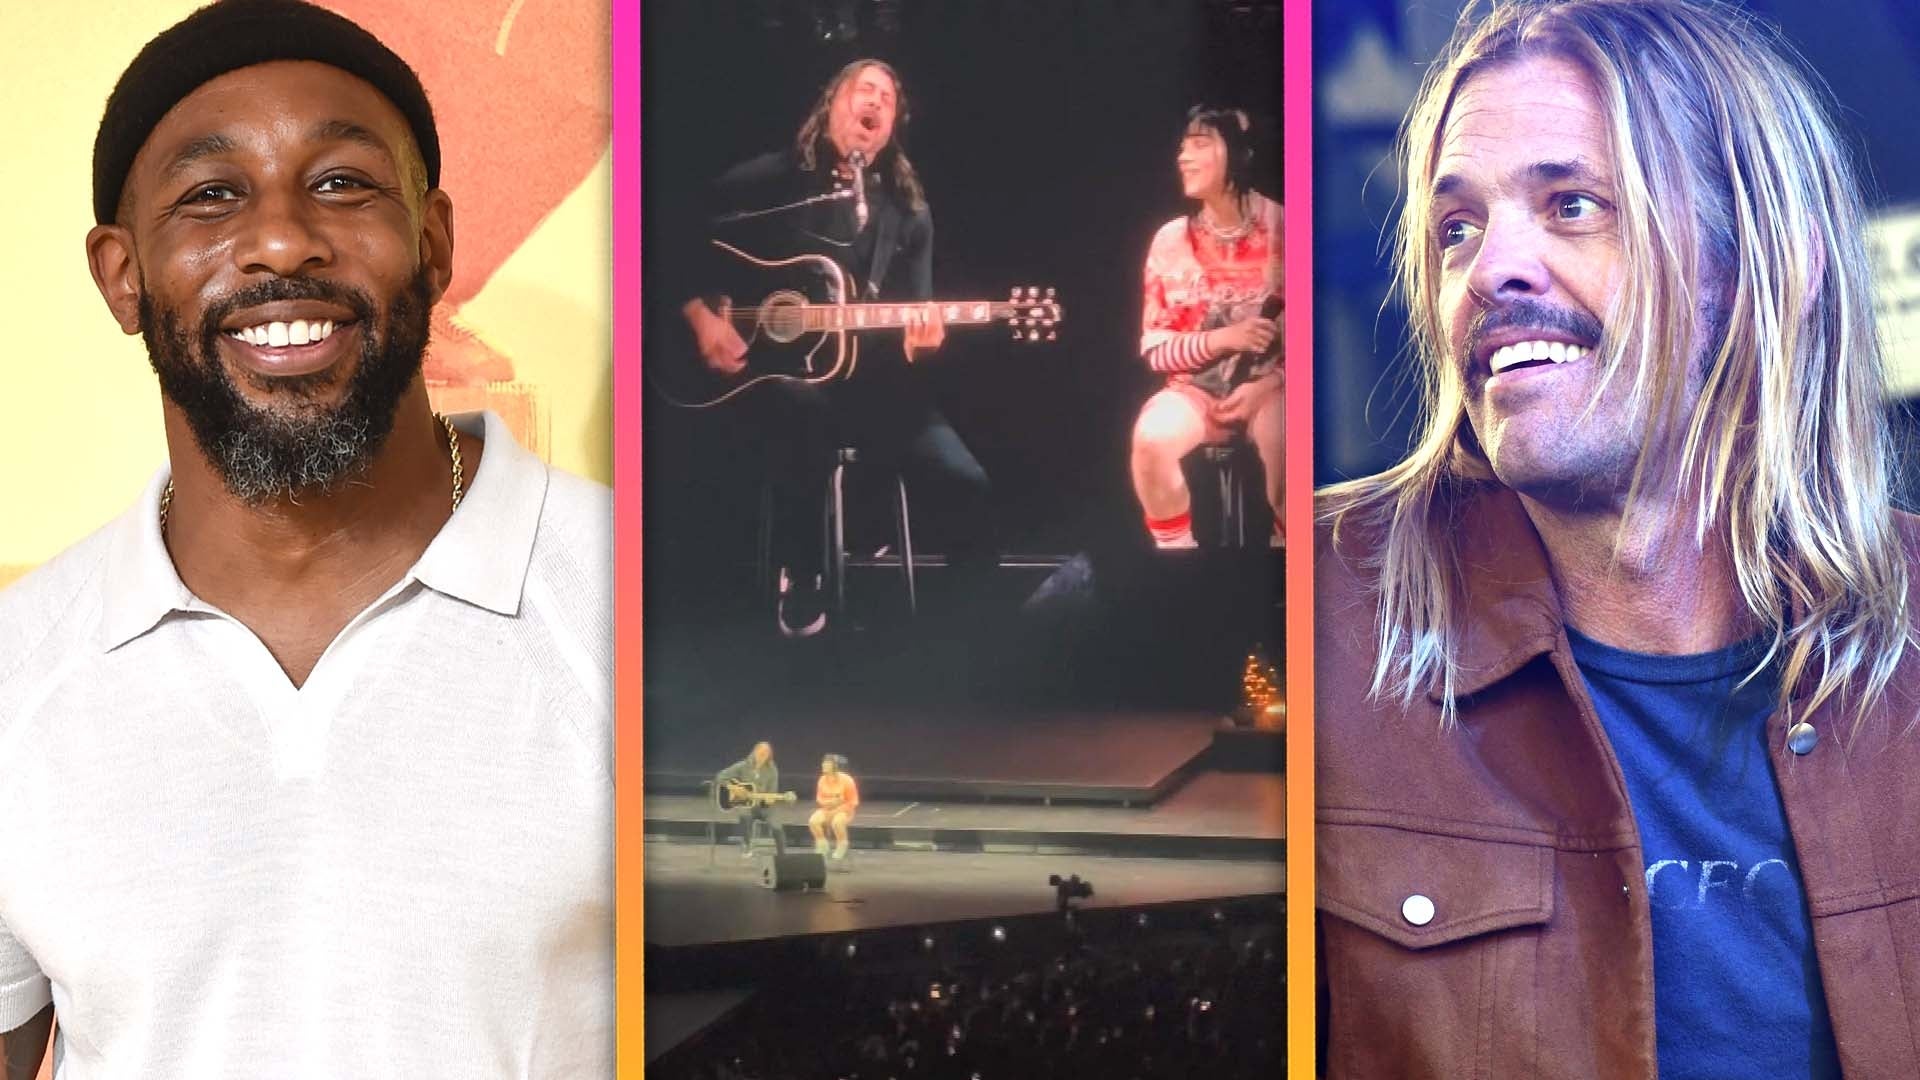 Billie Eilish Pays Tribute to Stephen 'tWitch' Boss and Taylor Hawkins During LA Concert 